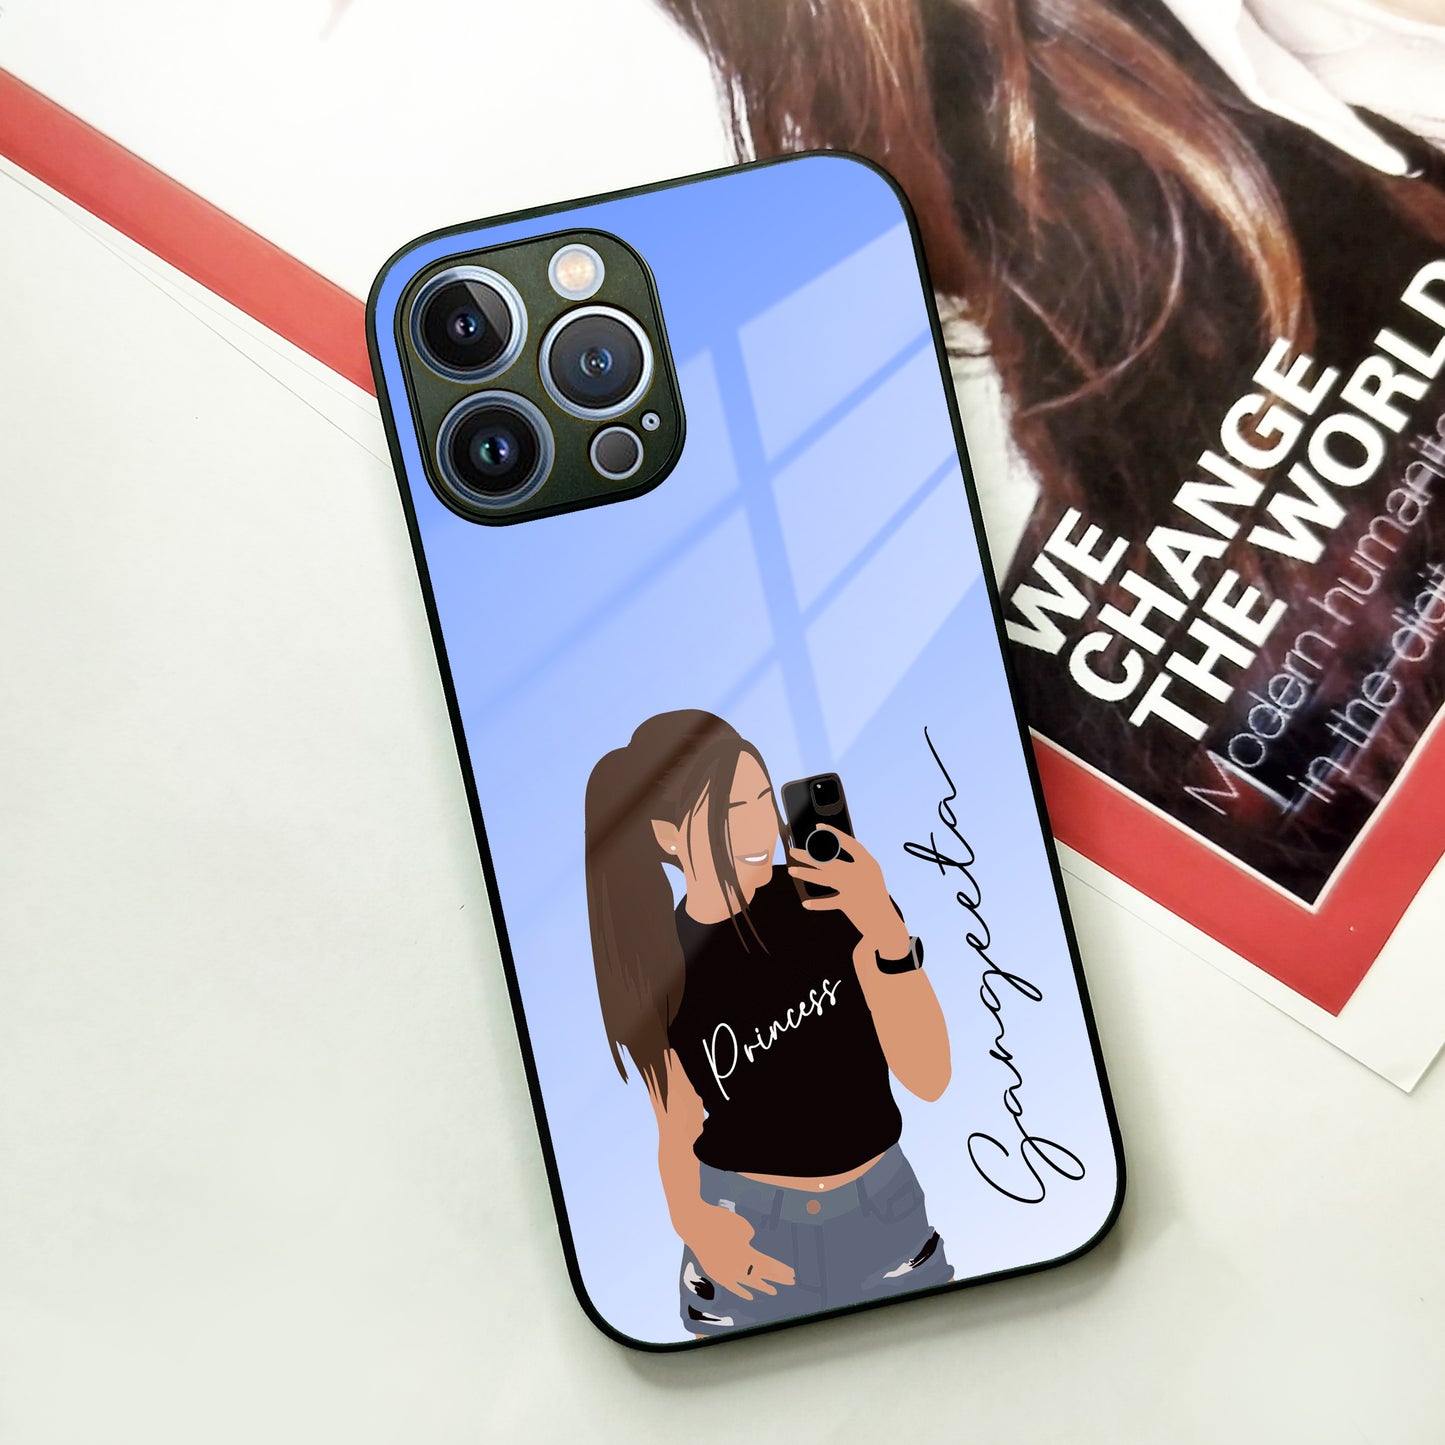 Mobile Girl  Glass Case Cover For iPhone